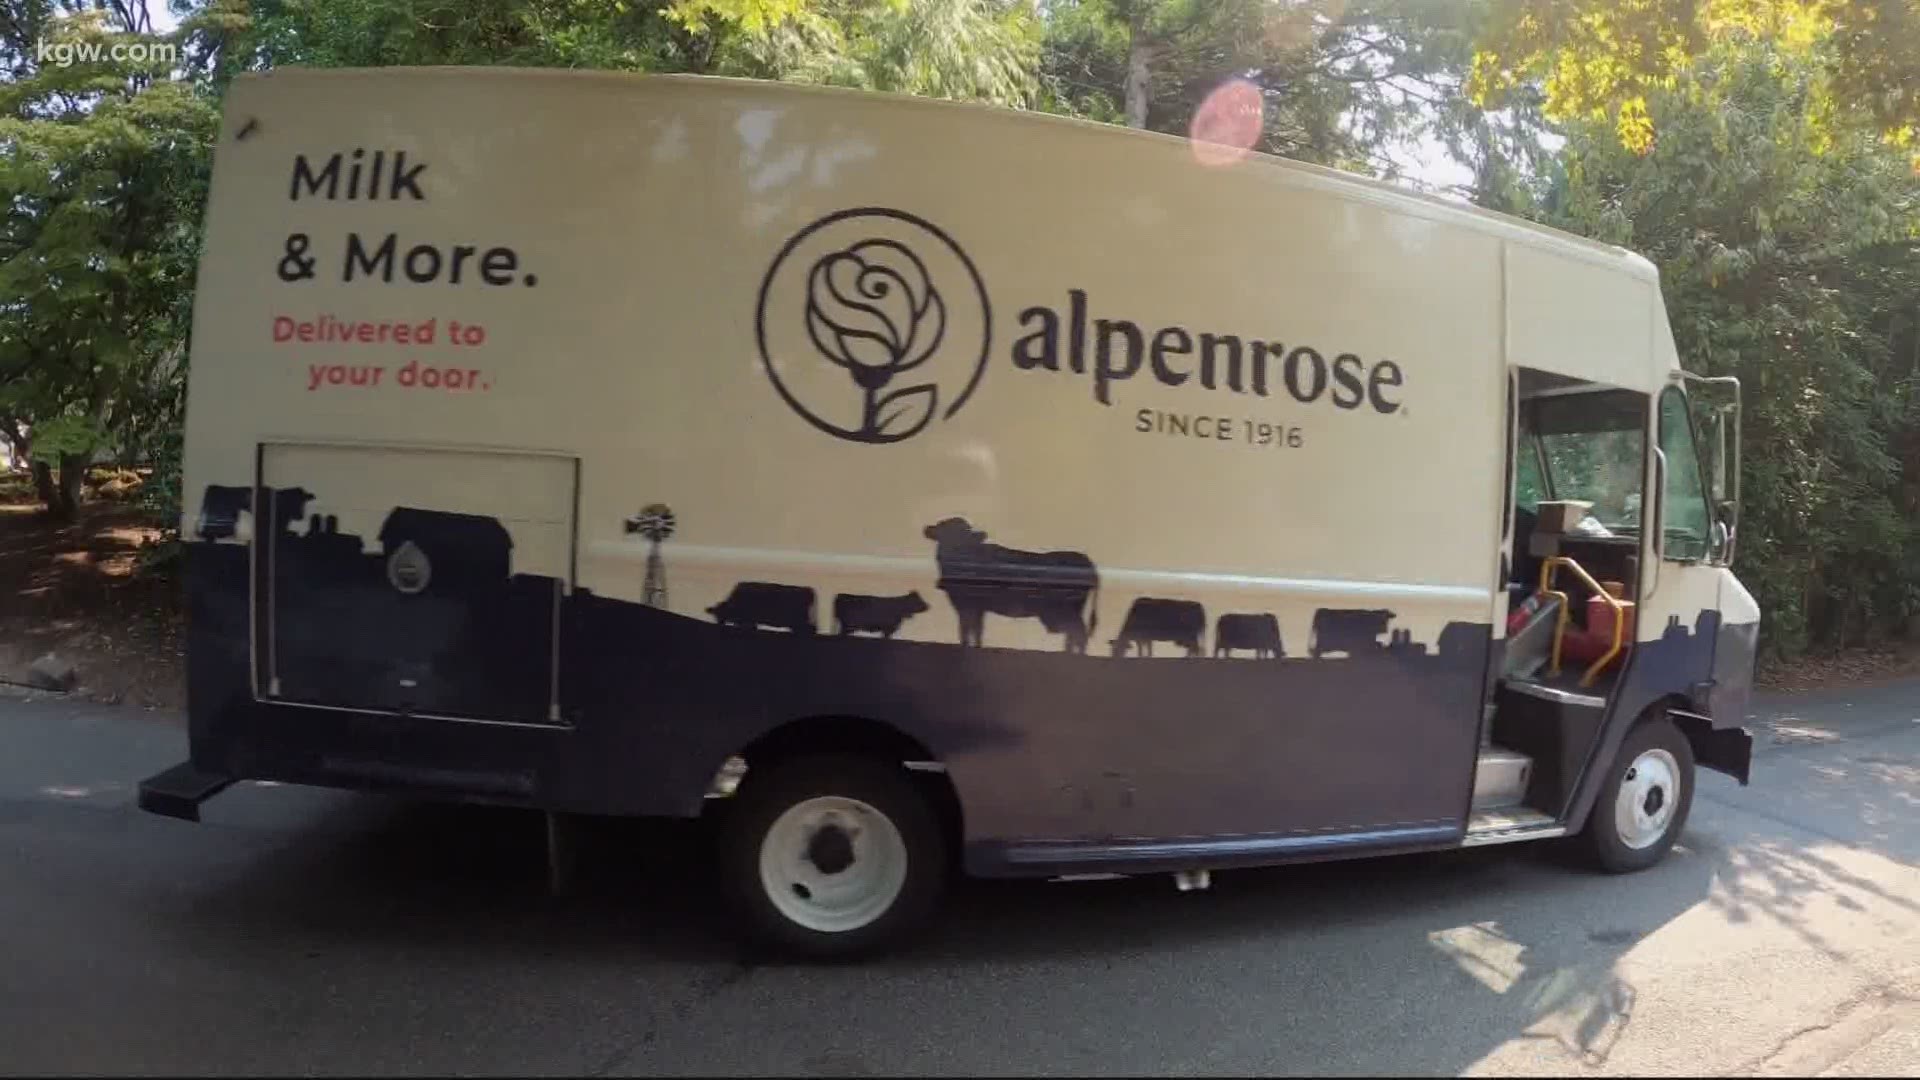 Alpenrose Dairy is bringing back the old tradition of delivering milk to people's homes.